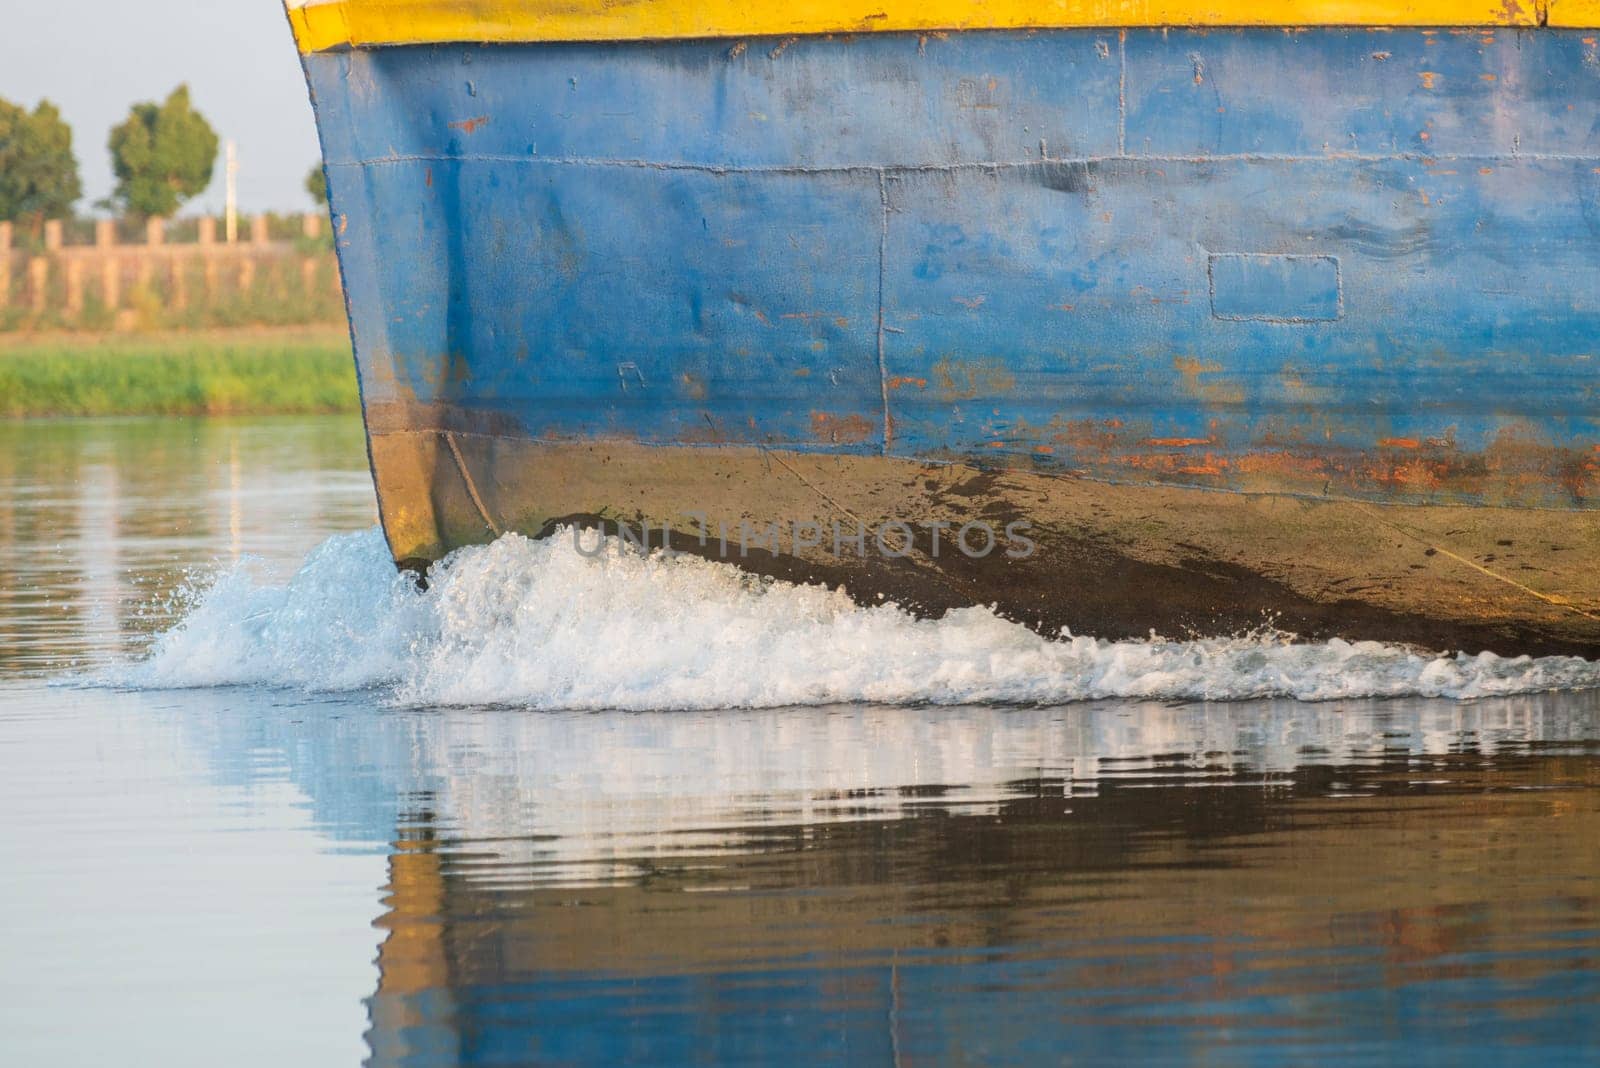 Closeup of bow on industrial river barge boat vessel traveling along large river in Africa 